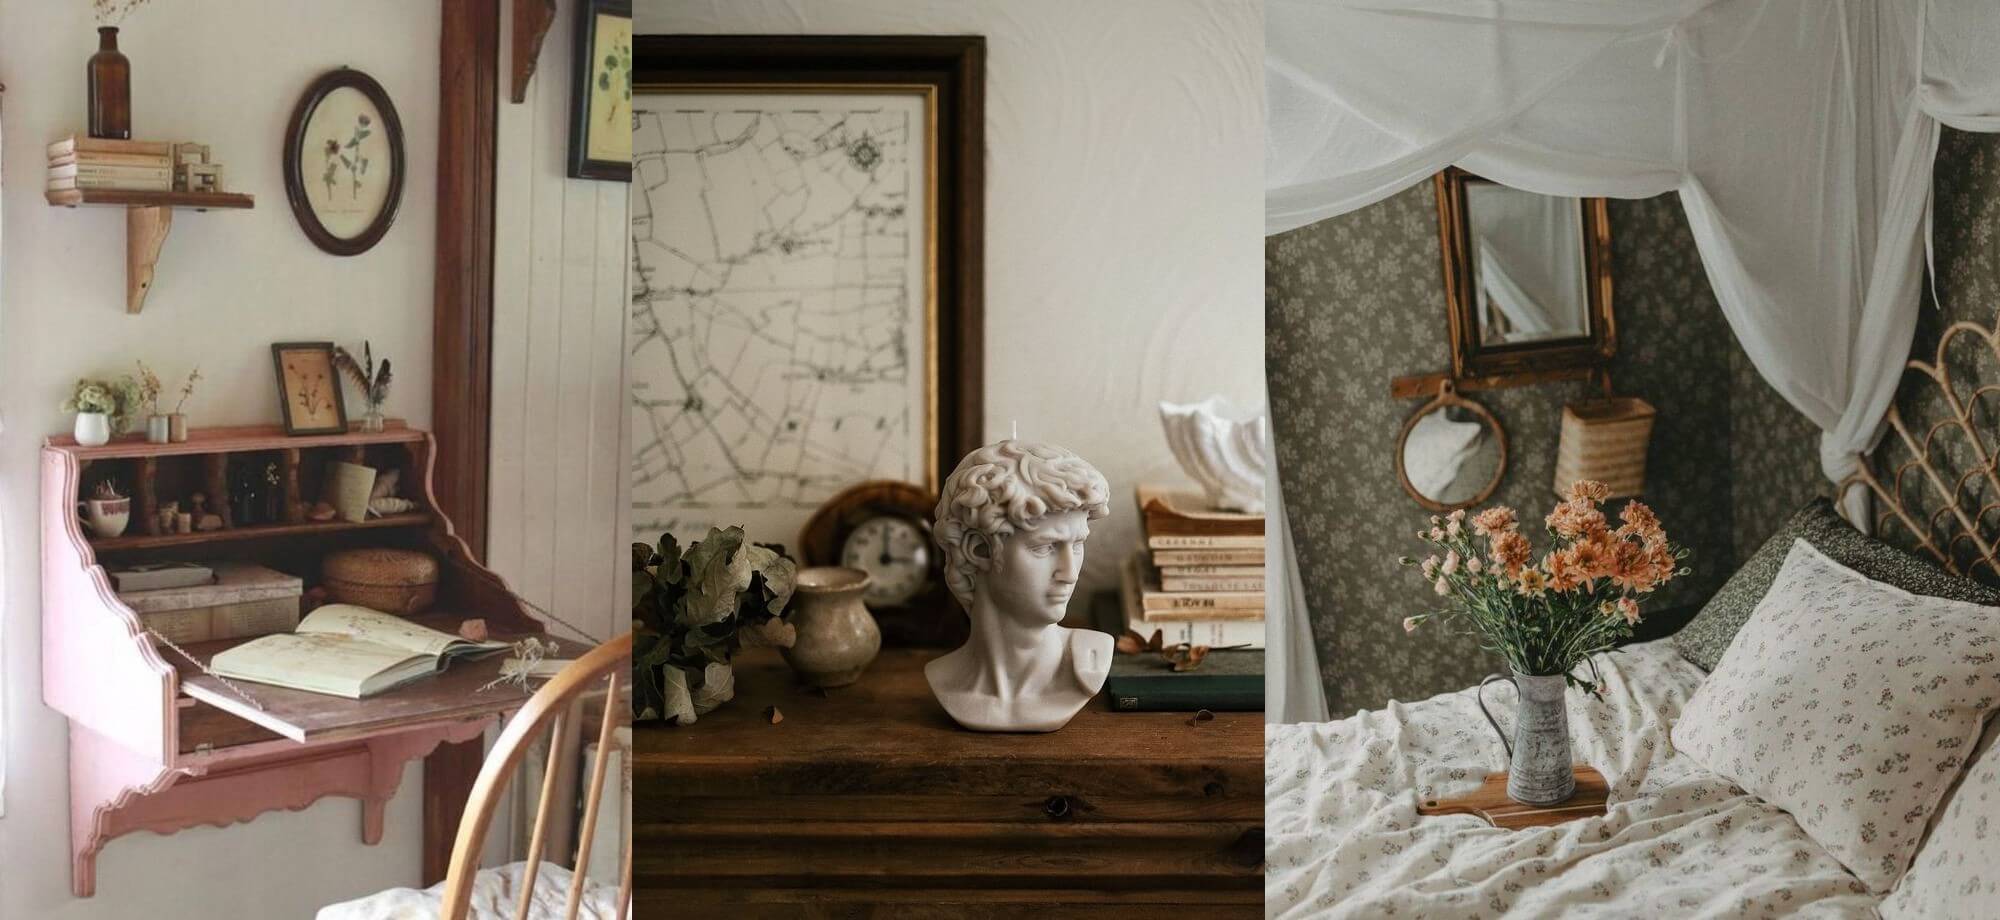 How to cottagecore your home: Guide and Inspiration